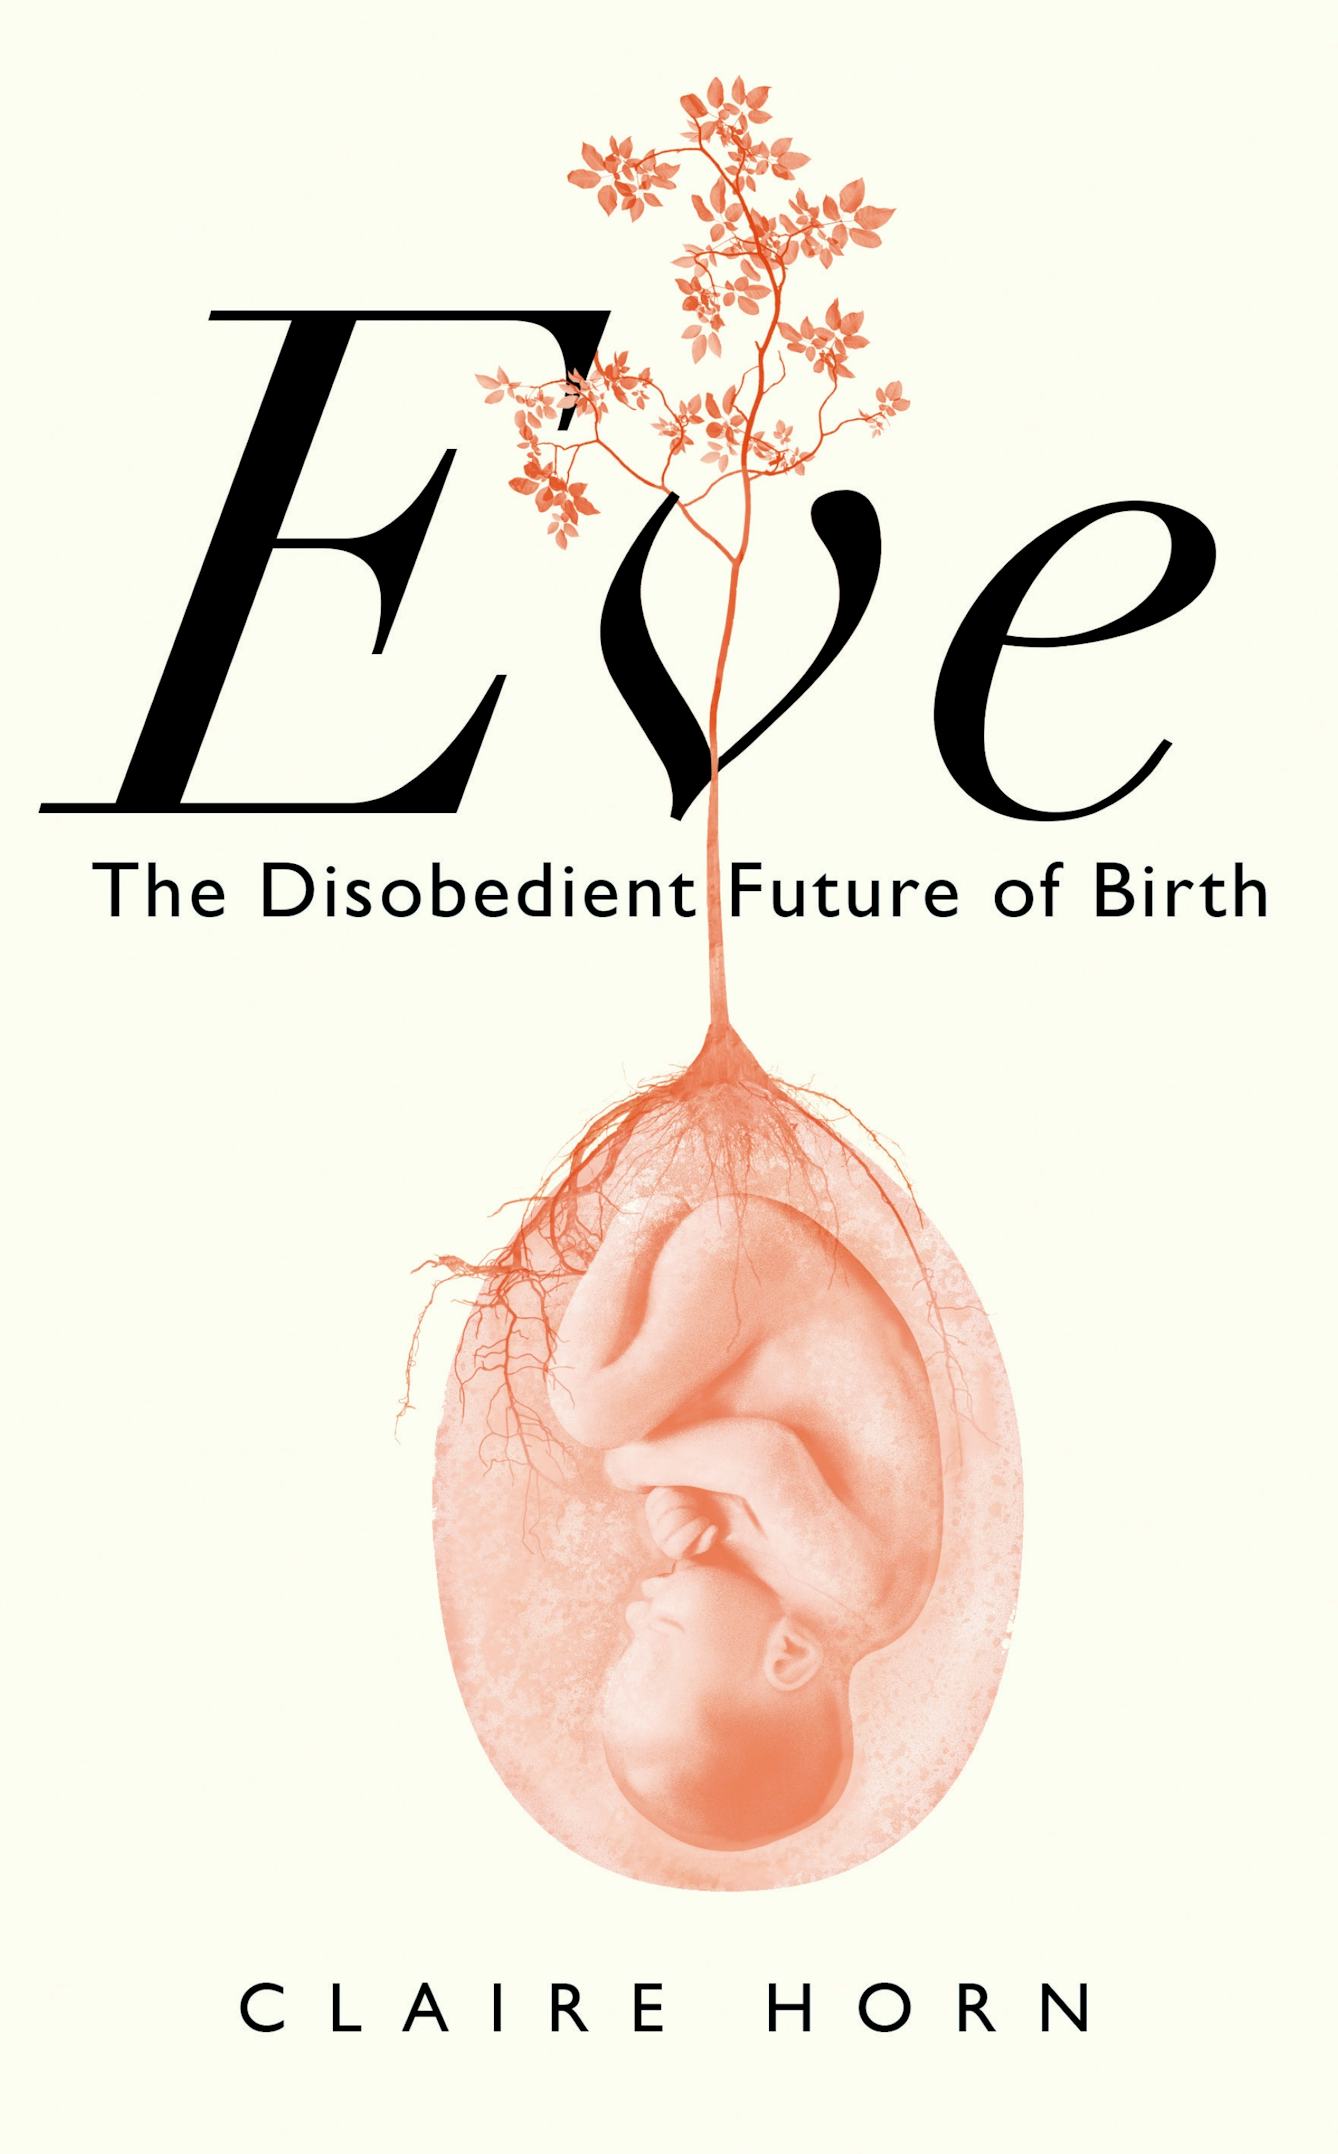 Book cover of 'Eve, The Disobedient Future of Birth' by Claire Horn